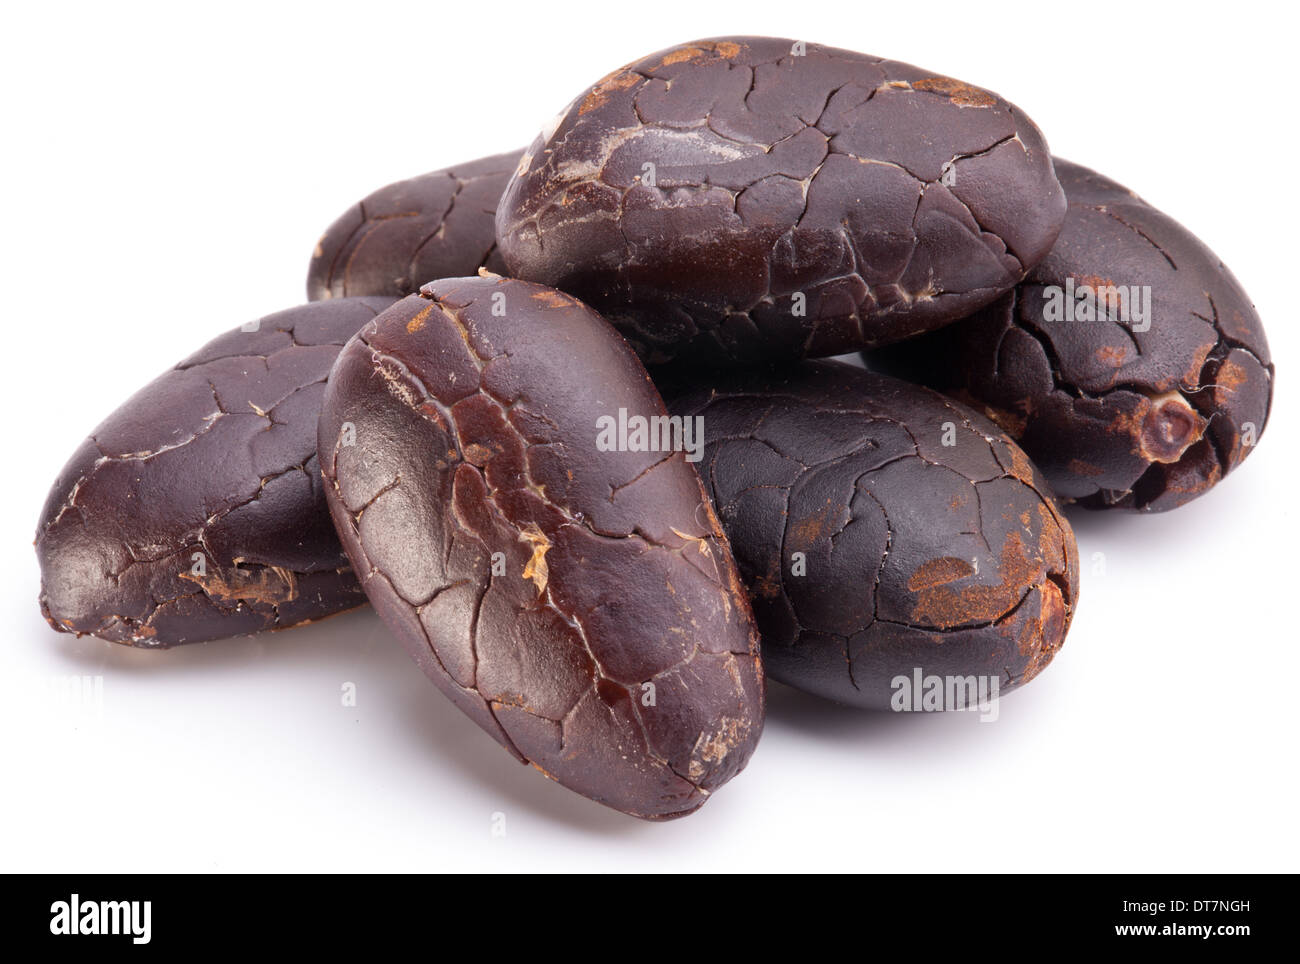 Cocoa beans on a white background. Stock Photo